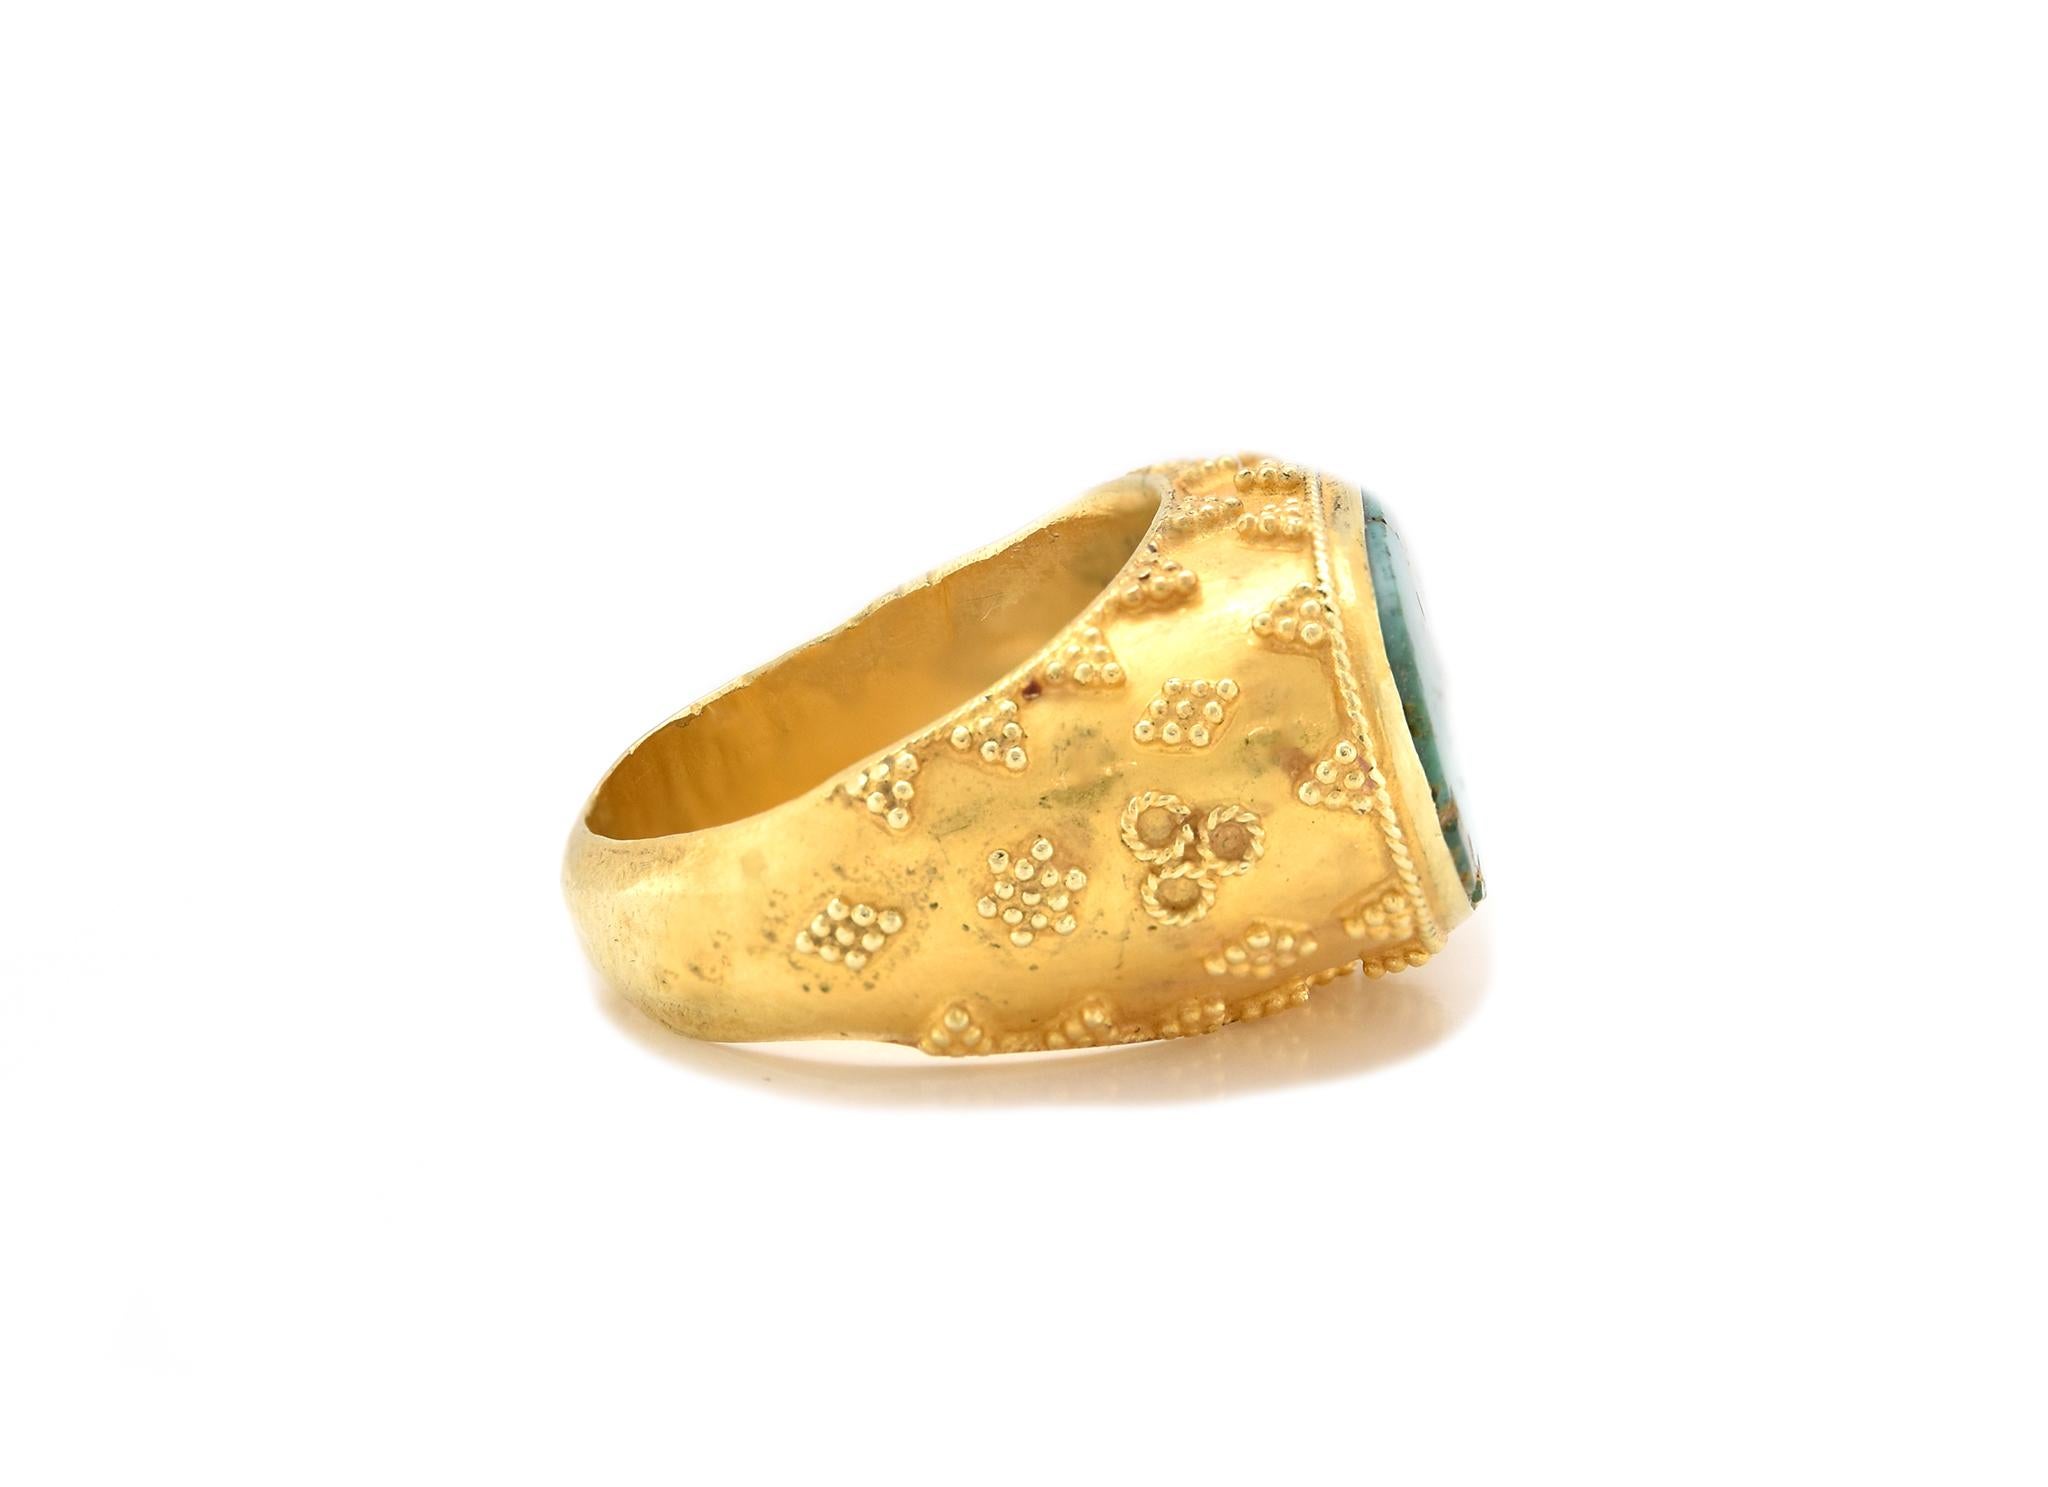 Designer: custom design
Material: 18K yellow gold
Dimensions: ring top measures 15.10mm wide
Ring Size: 7.5 (please allow two extra shipping days for sizing requests) 
Weight: 9.06 grams
